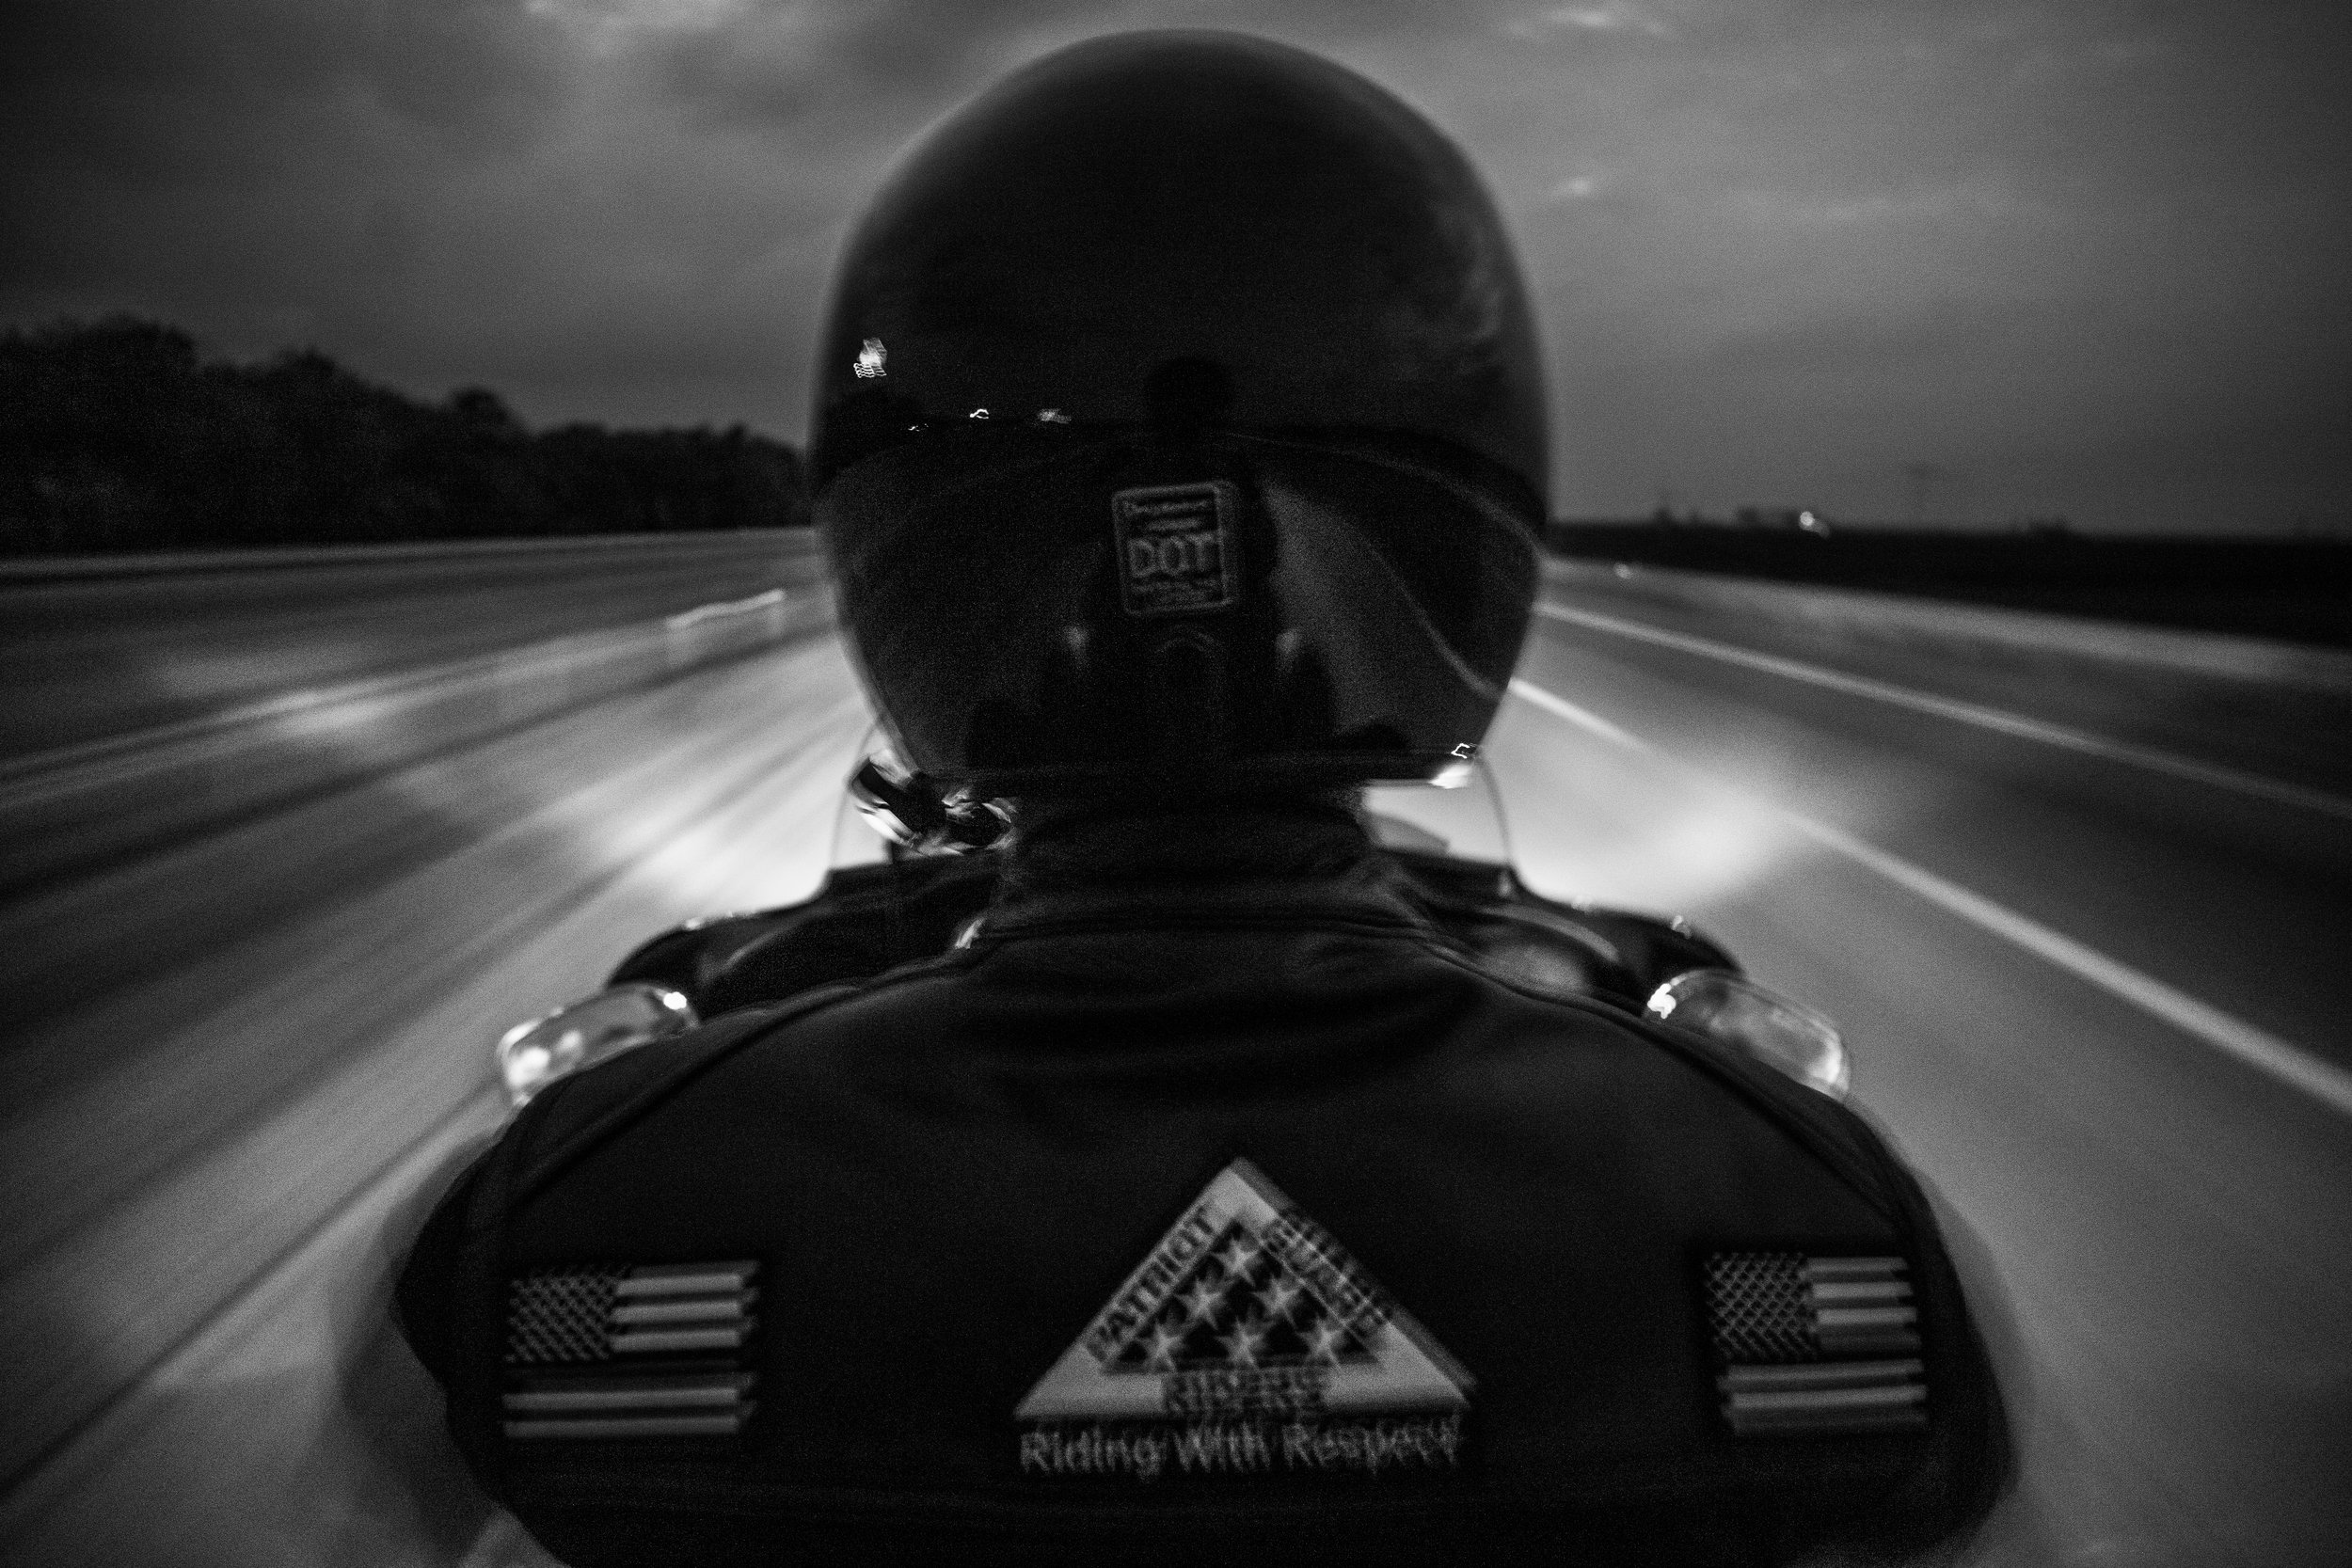  Patriot Guard Rider, Chris Krause, 32, rides his Harley Davidson motorcycle on Interstate 70 from Kingdom City to Columbia, Missouri for the 58th Honor Flight on Tuesday, Jun. 18, 2019. This was Krause's first honor flight ride, which featured 256 m